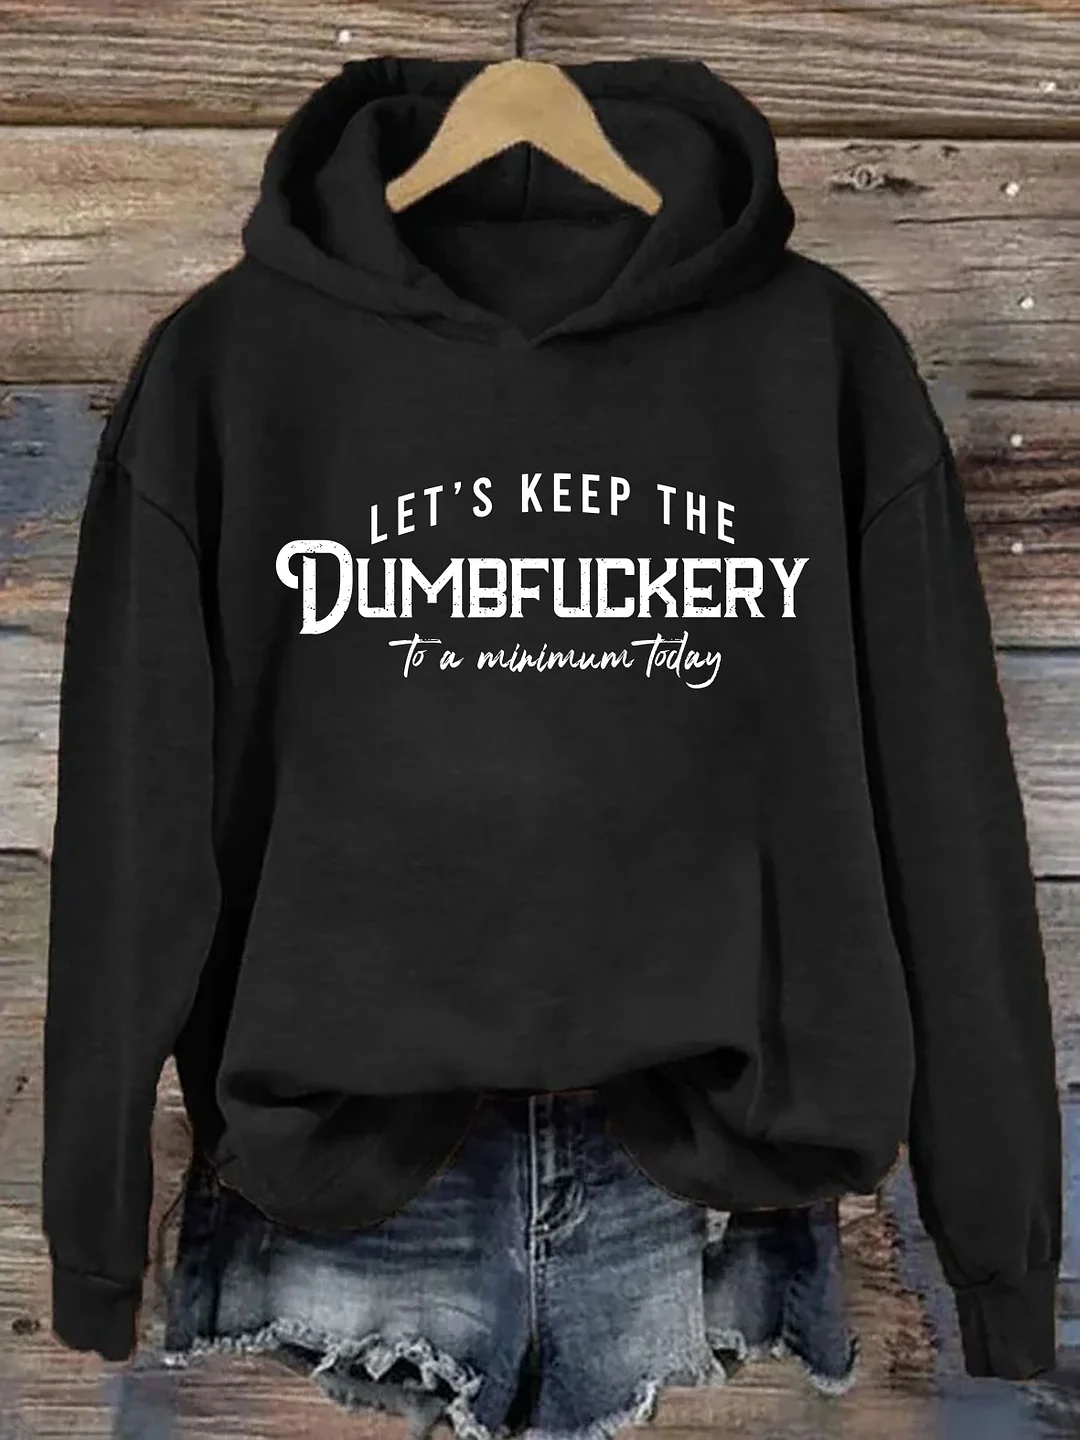 Let's Keep The Dumbfuckery To a Minimum Today Hoodie